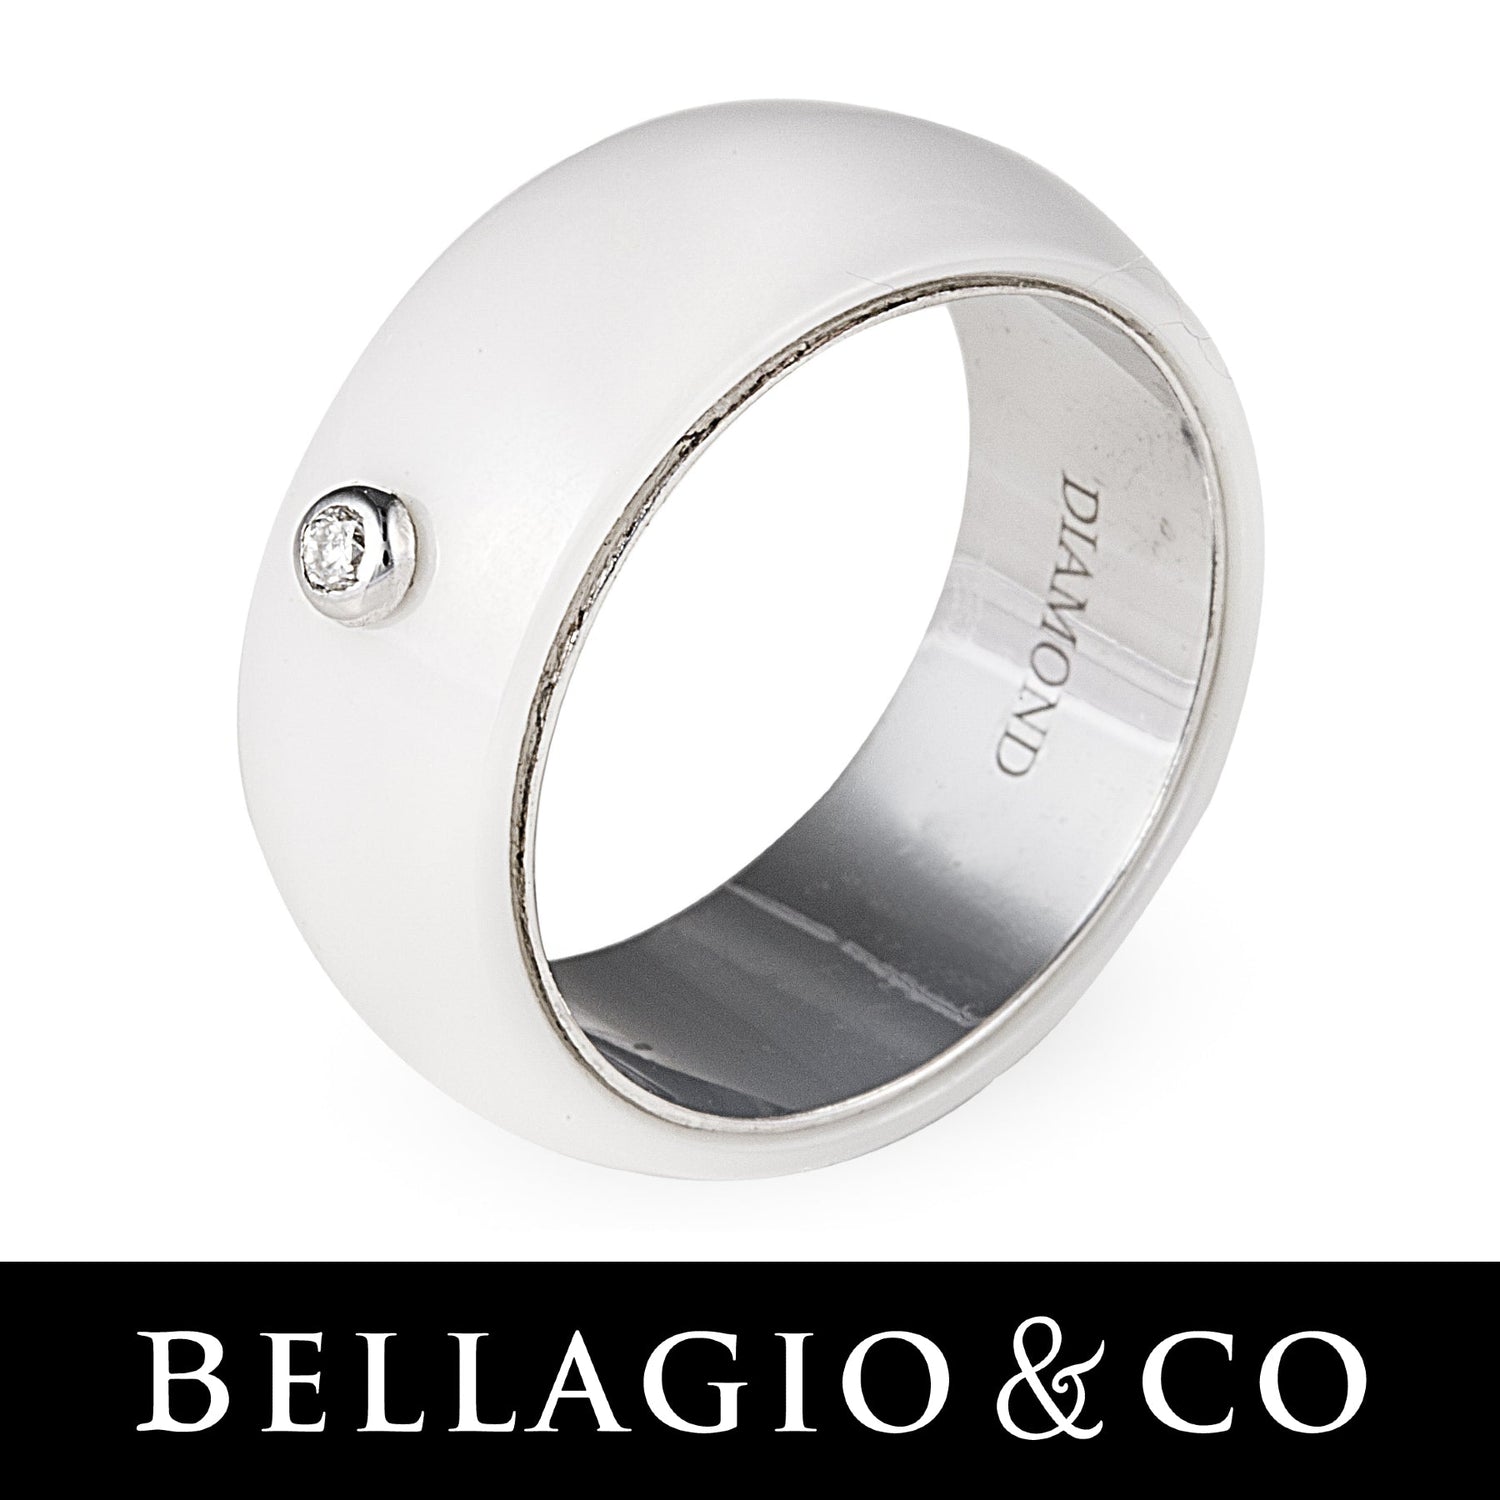 Browse jewellery with a subtle sparkle by Bellagio & Co. Cubic zirconia and real diamond jewellery. Rings, Earrings, Bracelets, Chains, Necklaces, Pendants. Worldwide shipping. Based in Melbourne, Australia.